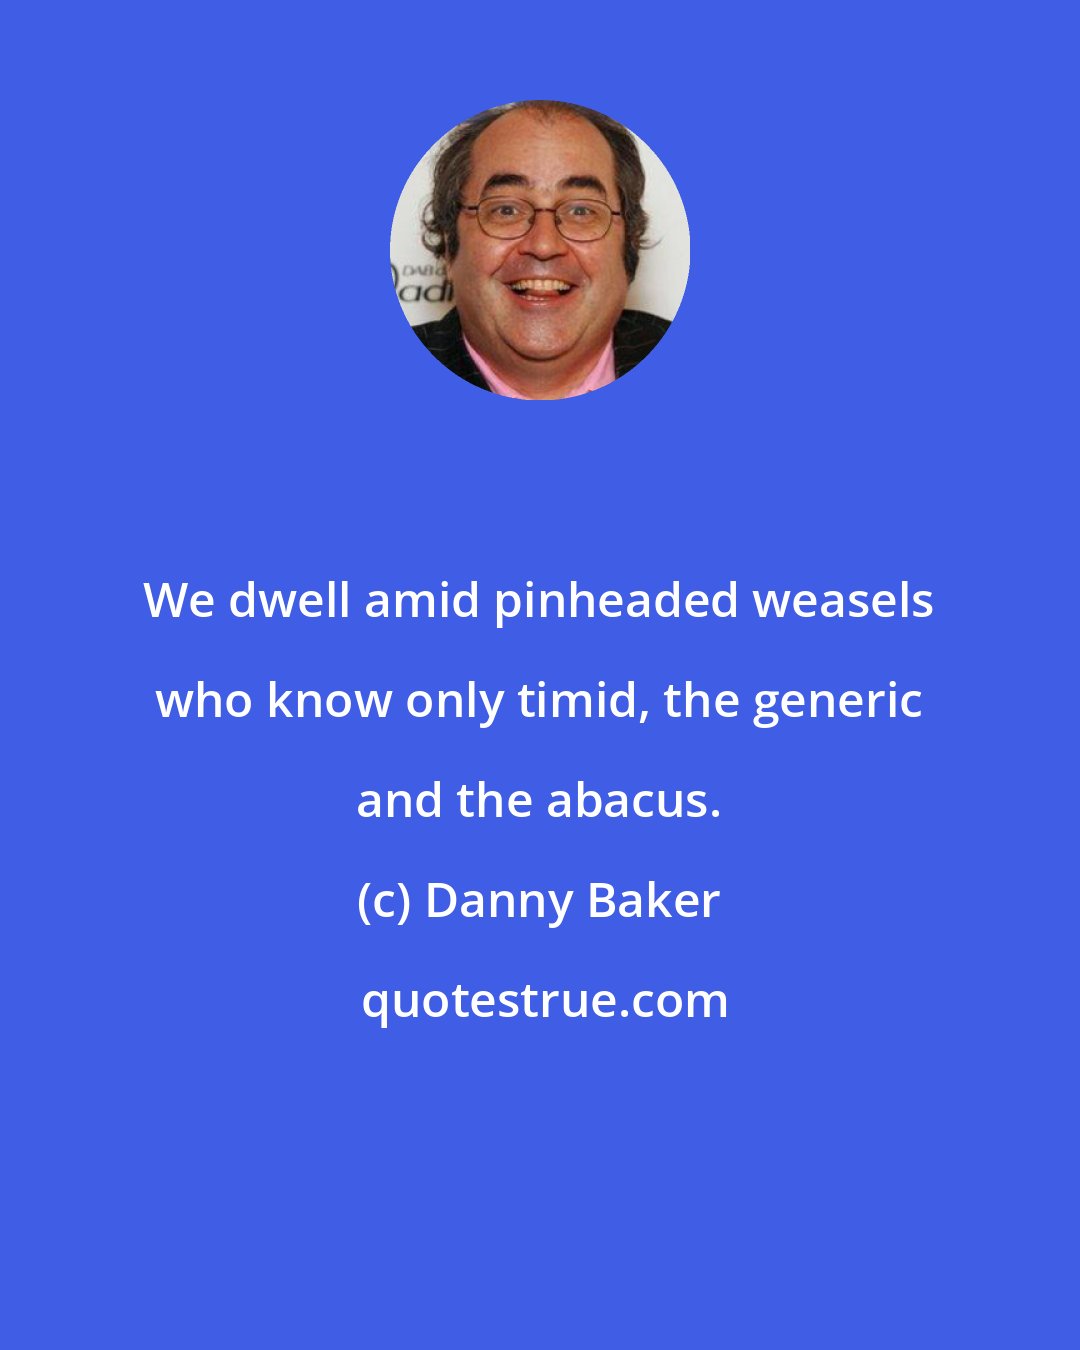 Danny Baker: We dwell amid pinheaded weasels who know only timid, the generic and the abacus.